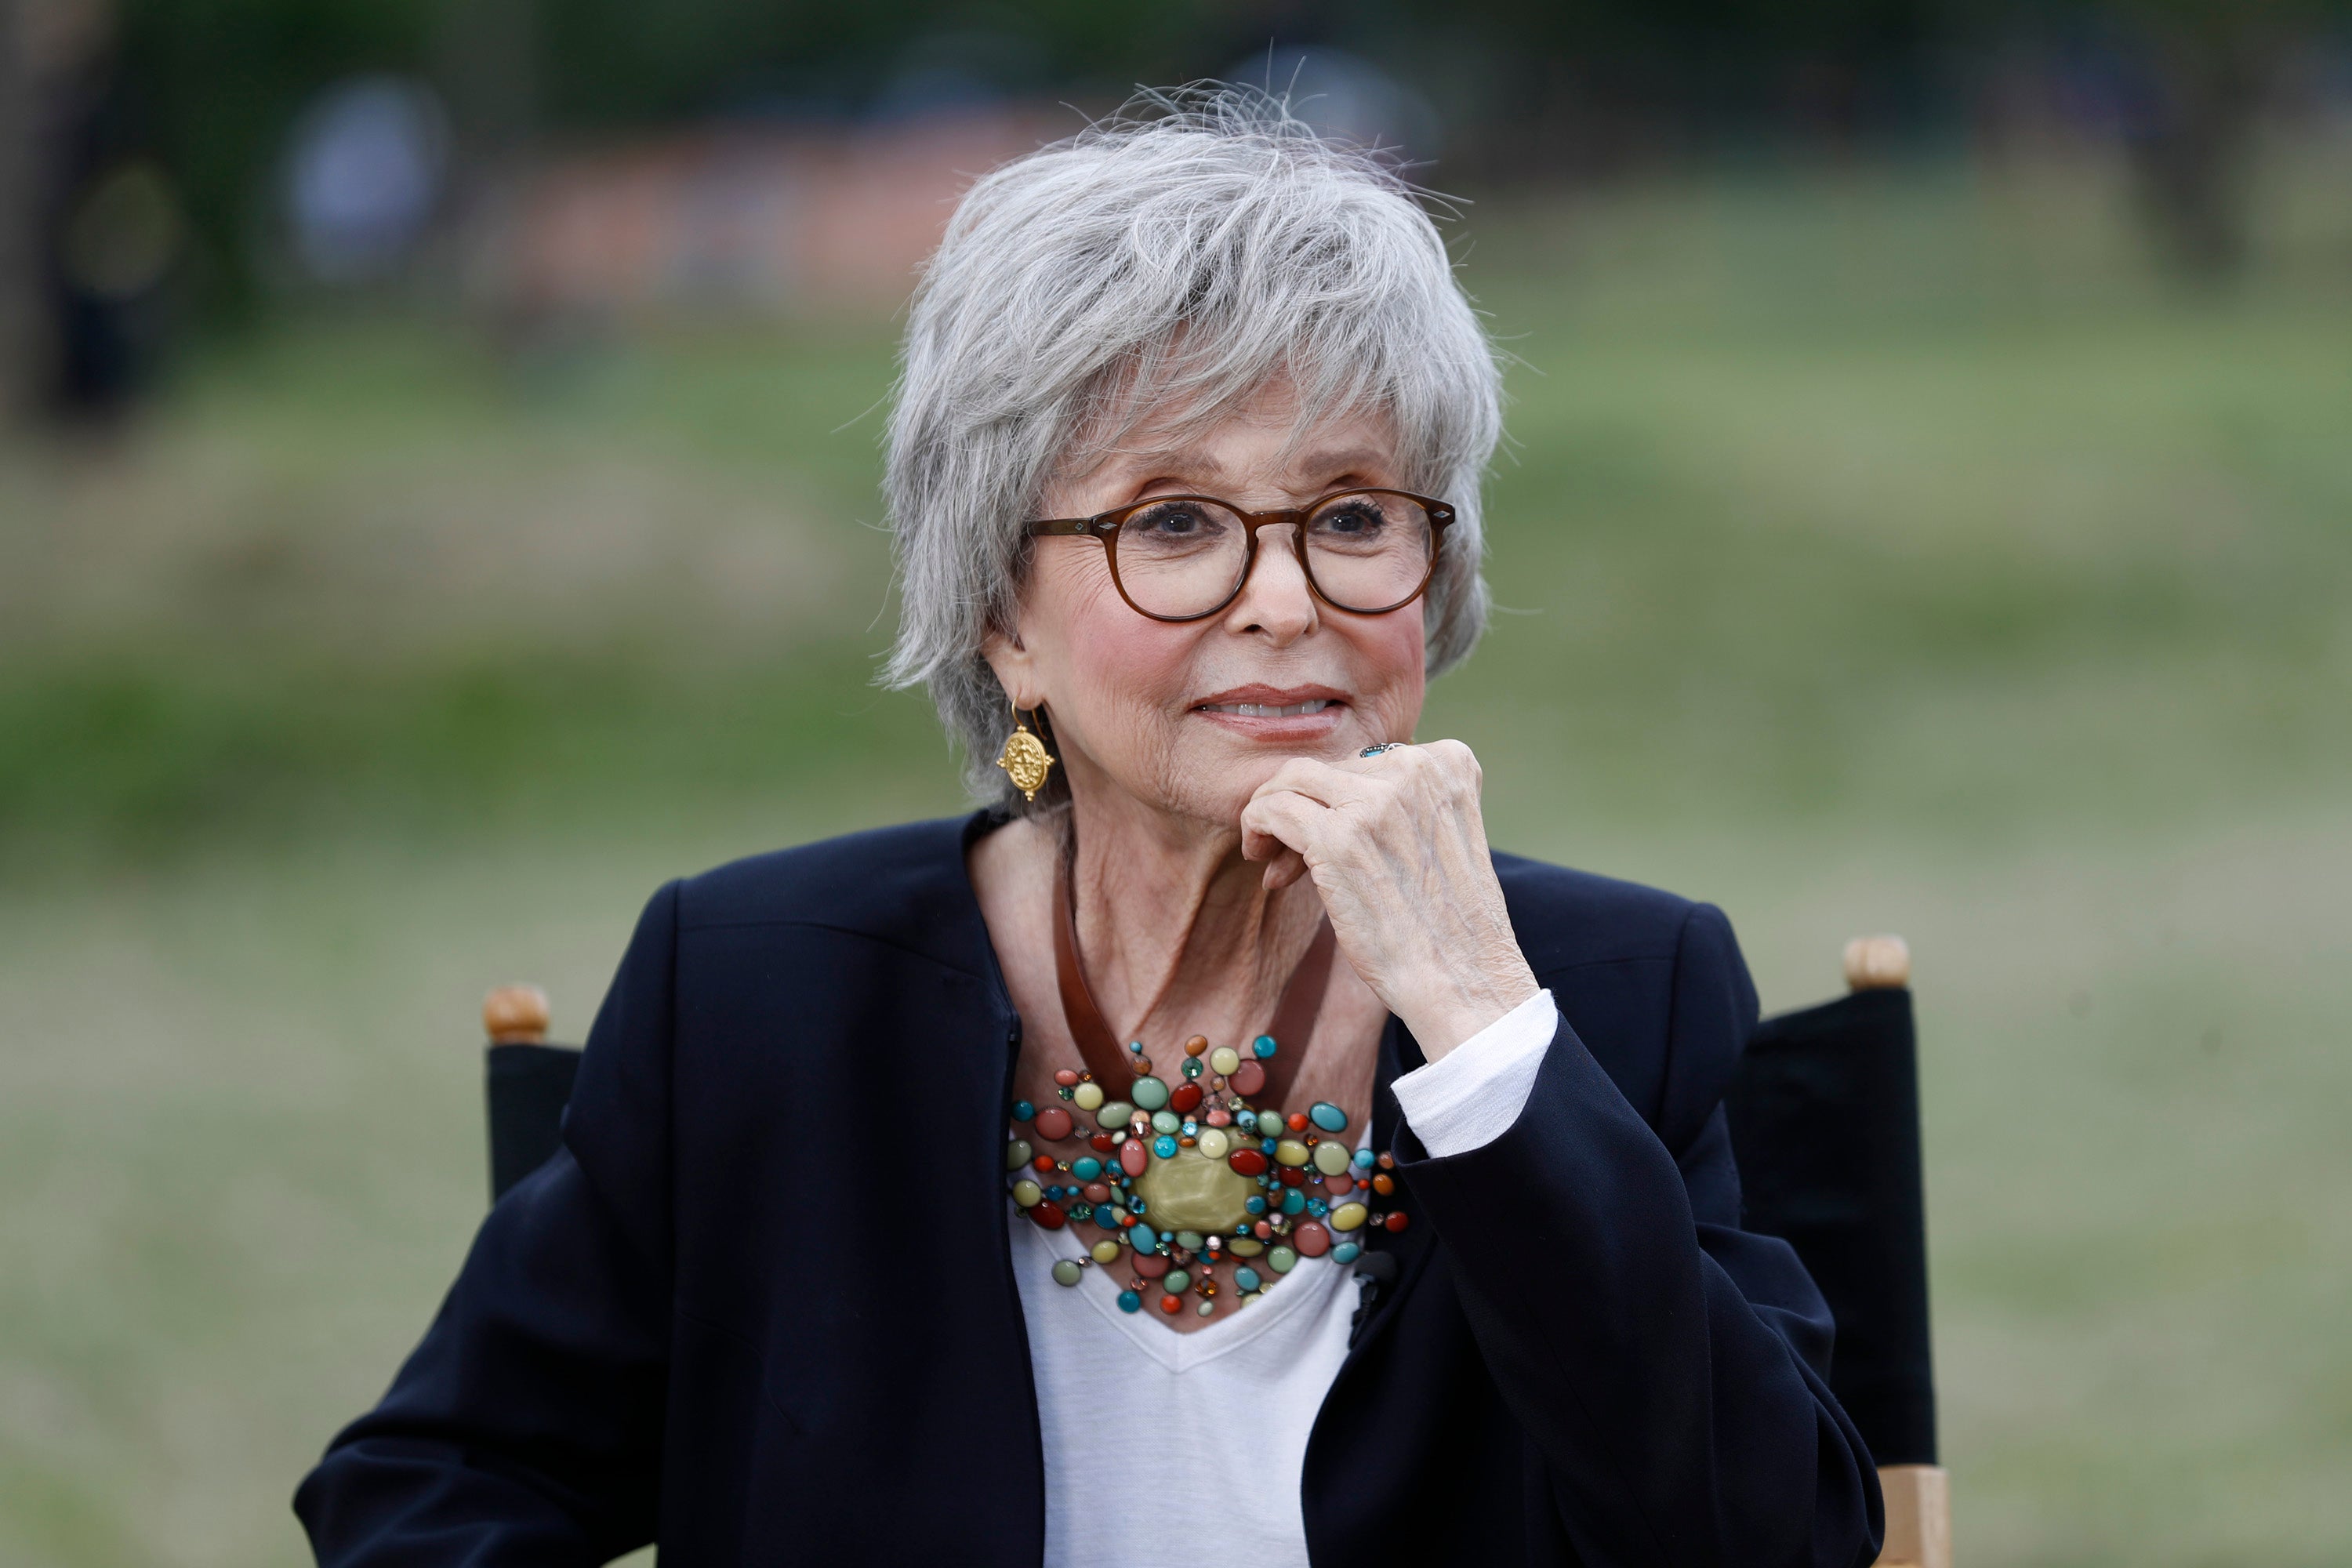 Rita Moreno Apologizes for Being 'Dismissive' of 'In the Heights' Colorism Criticism